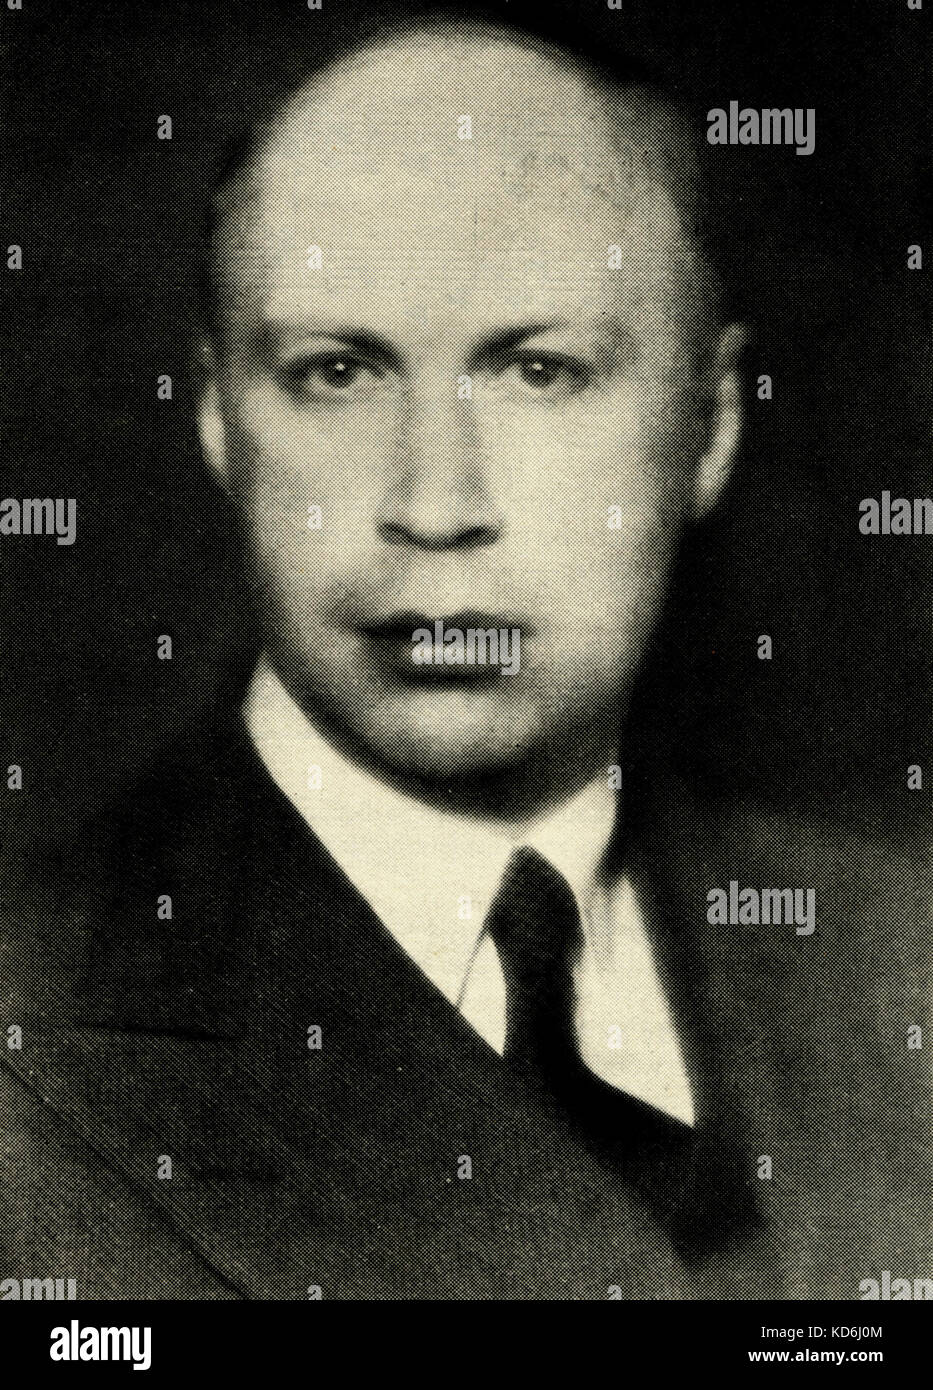 Sergei Prokofiev, Russian composer and pianist, 1891-1953.  From the programme of  a BBC Symphony Orchestra concert, Wednesday 31st January 1934, where Prokofiev was the solo pianist. Russian composer, 1891-1953. Stock Photo